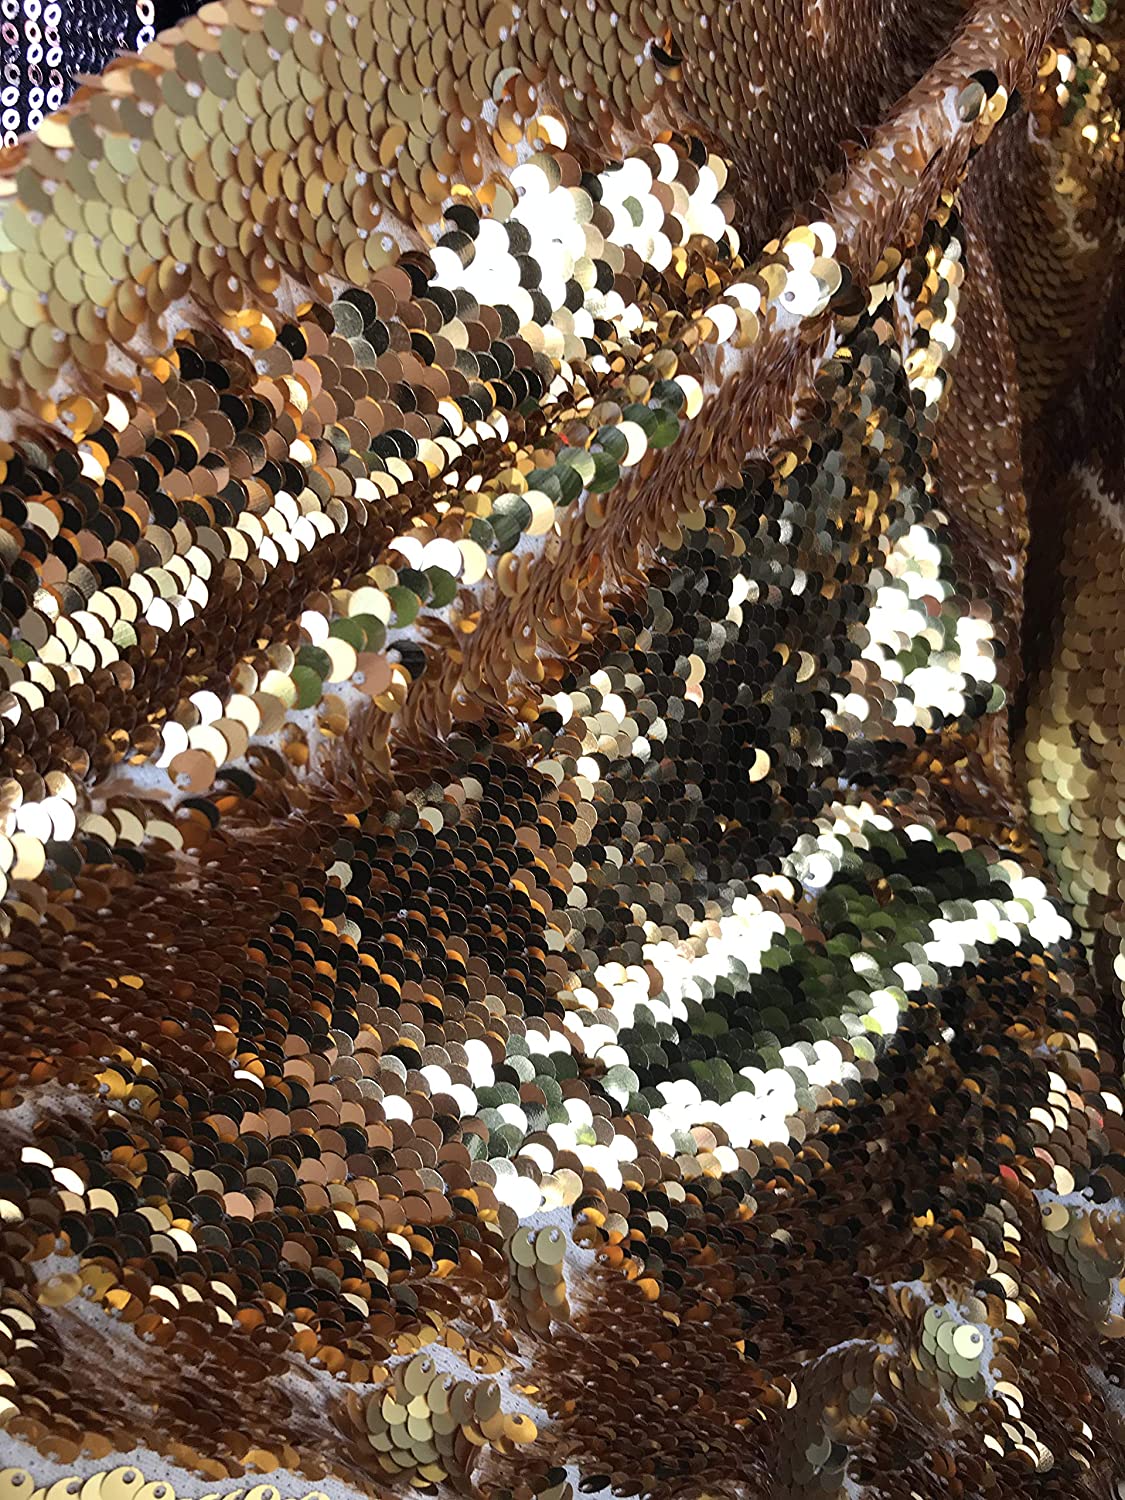 54" Wide Mermaid Flip Up Sequin Reversible Sparkly Fabric for Dress Clothing Making, Home Decor (Shiny Gold & Matt Gold, by The Yard)